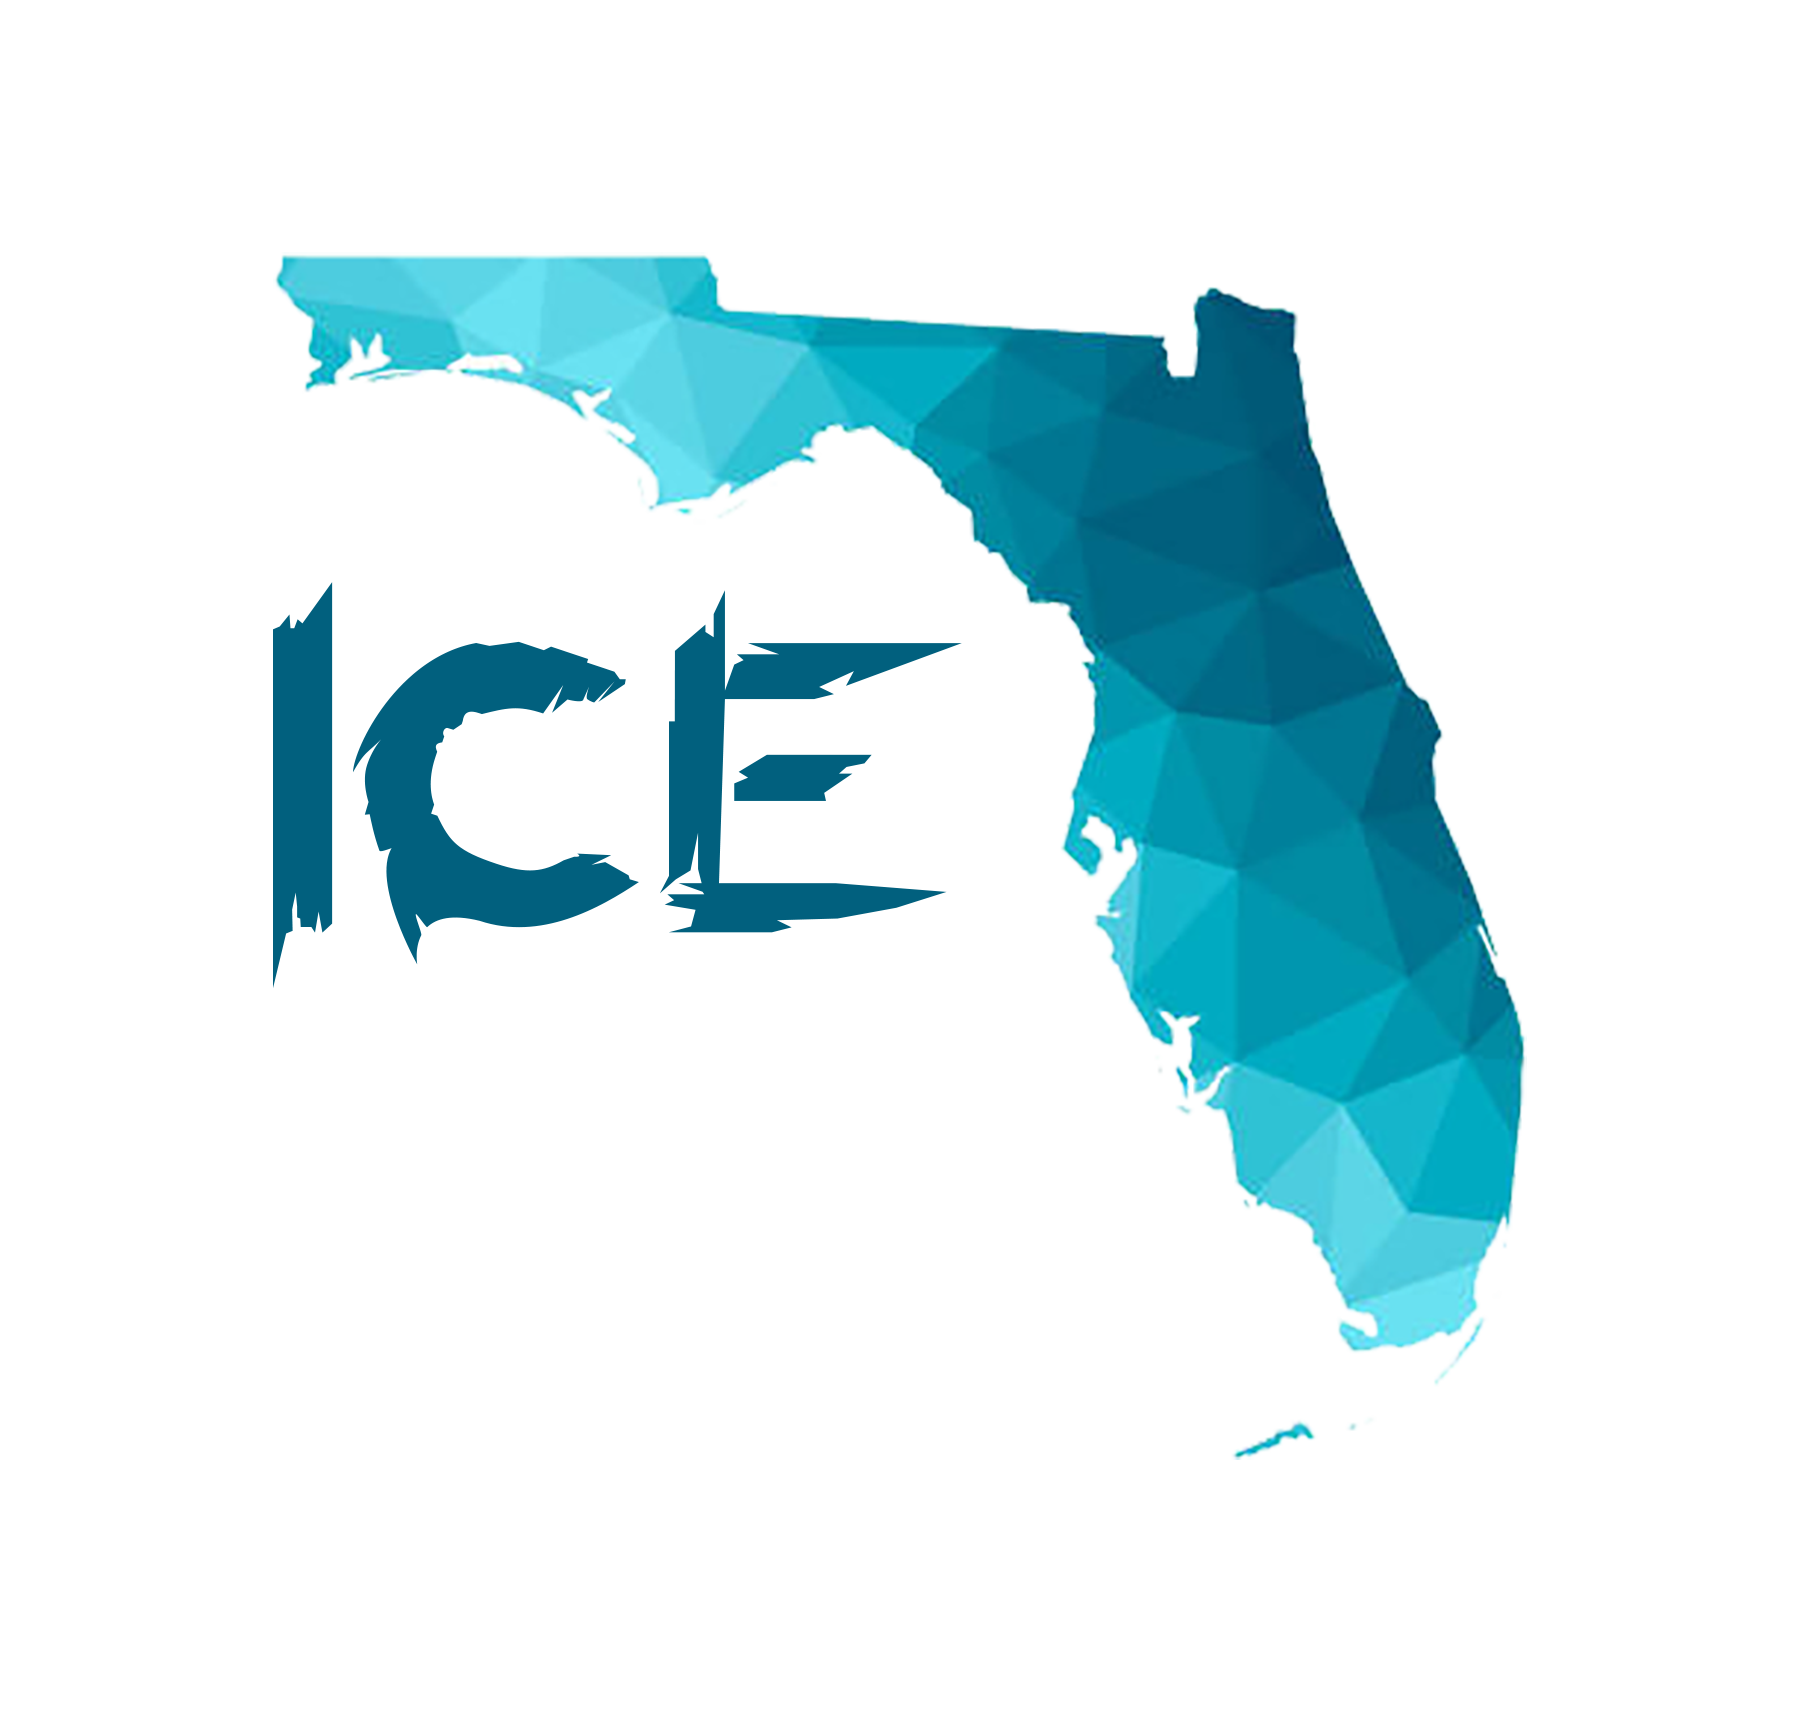 https://indieprofootball.com/wp-content/uploads/2022/09/ICE-LOGO-copy.png